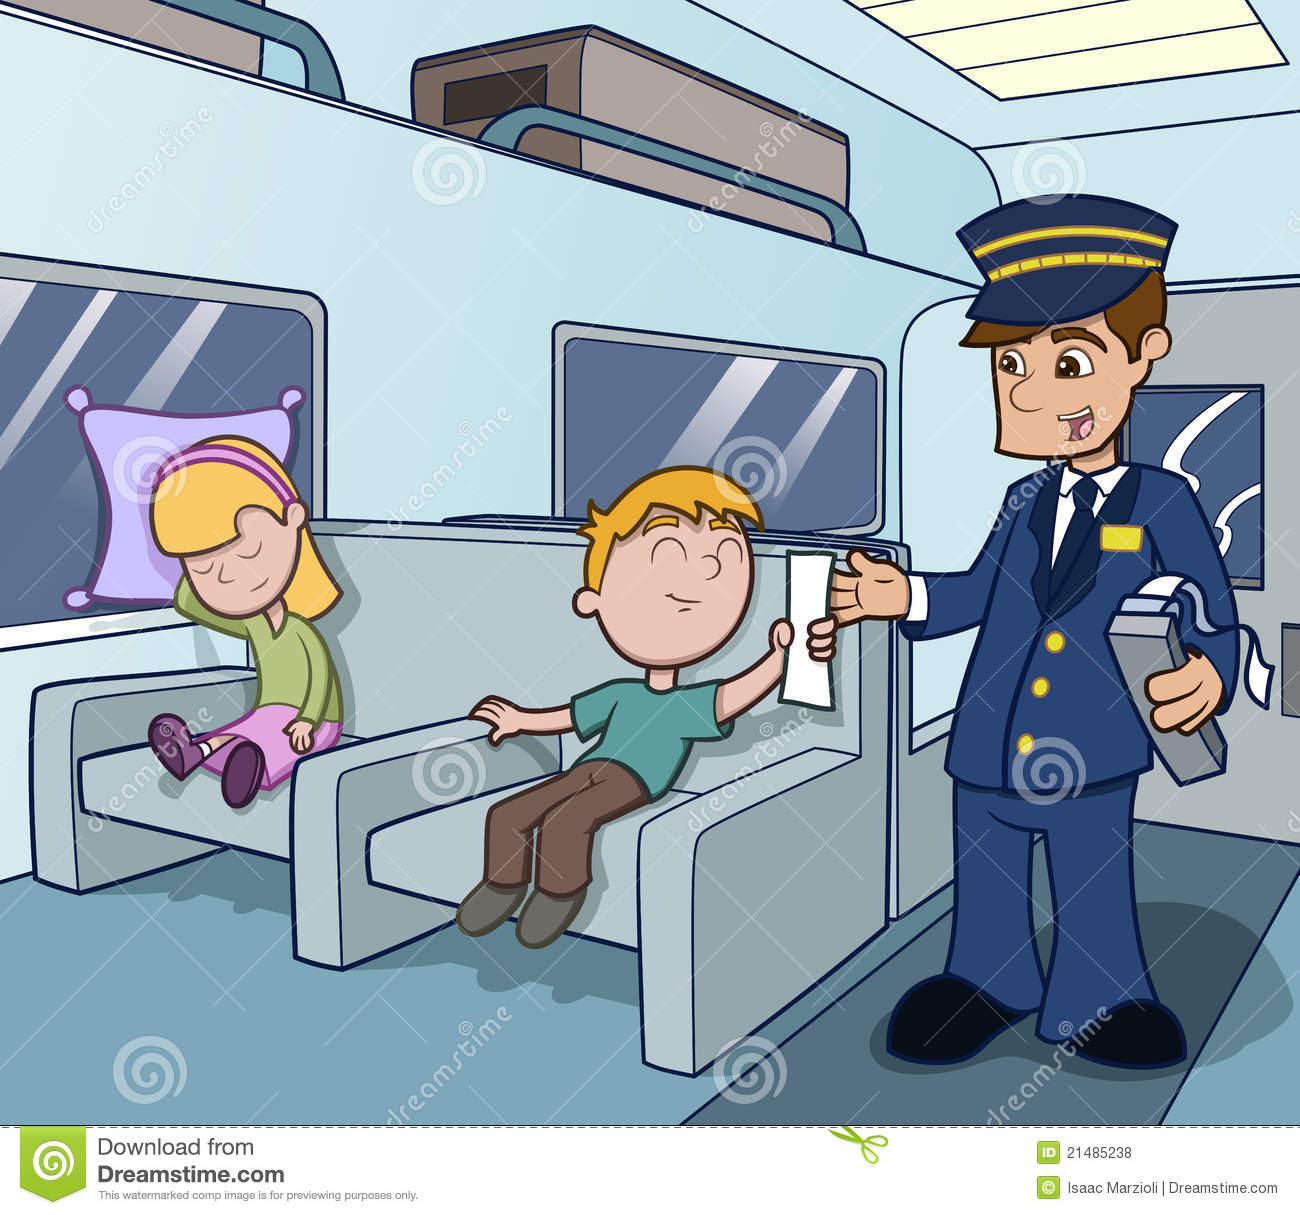 Train Conductor Assisting With Travel Royalty Free Stock Photos